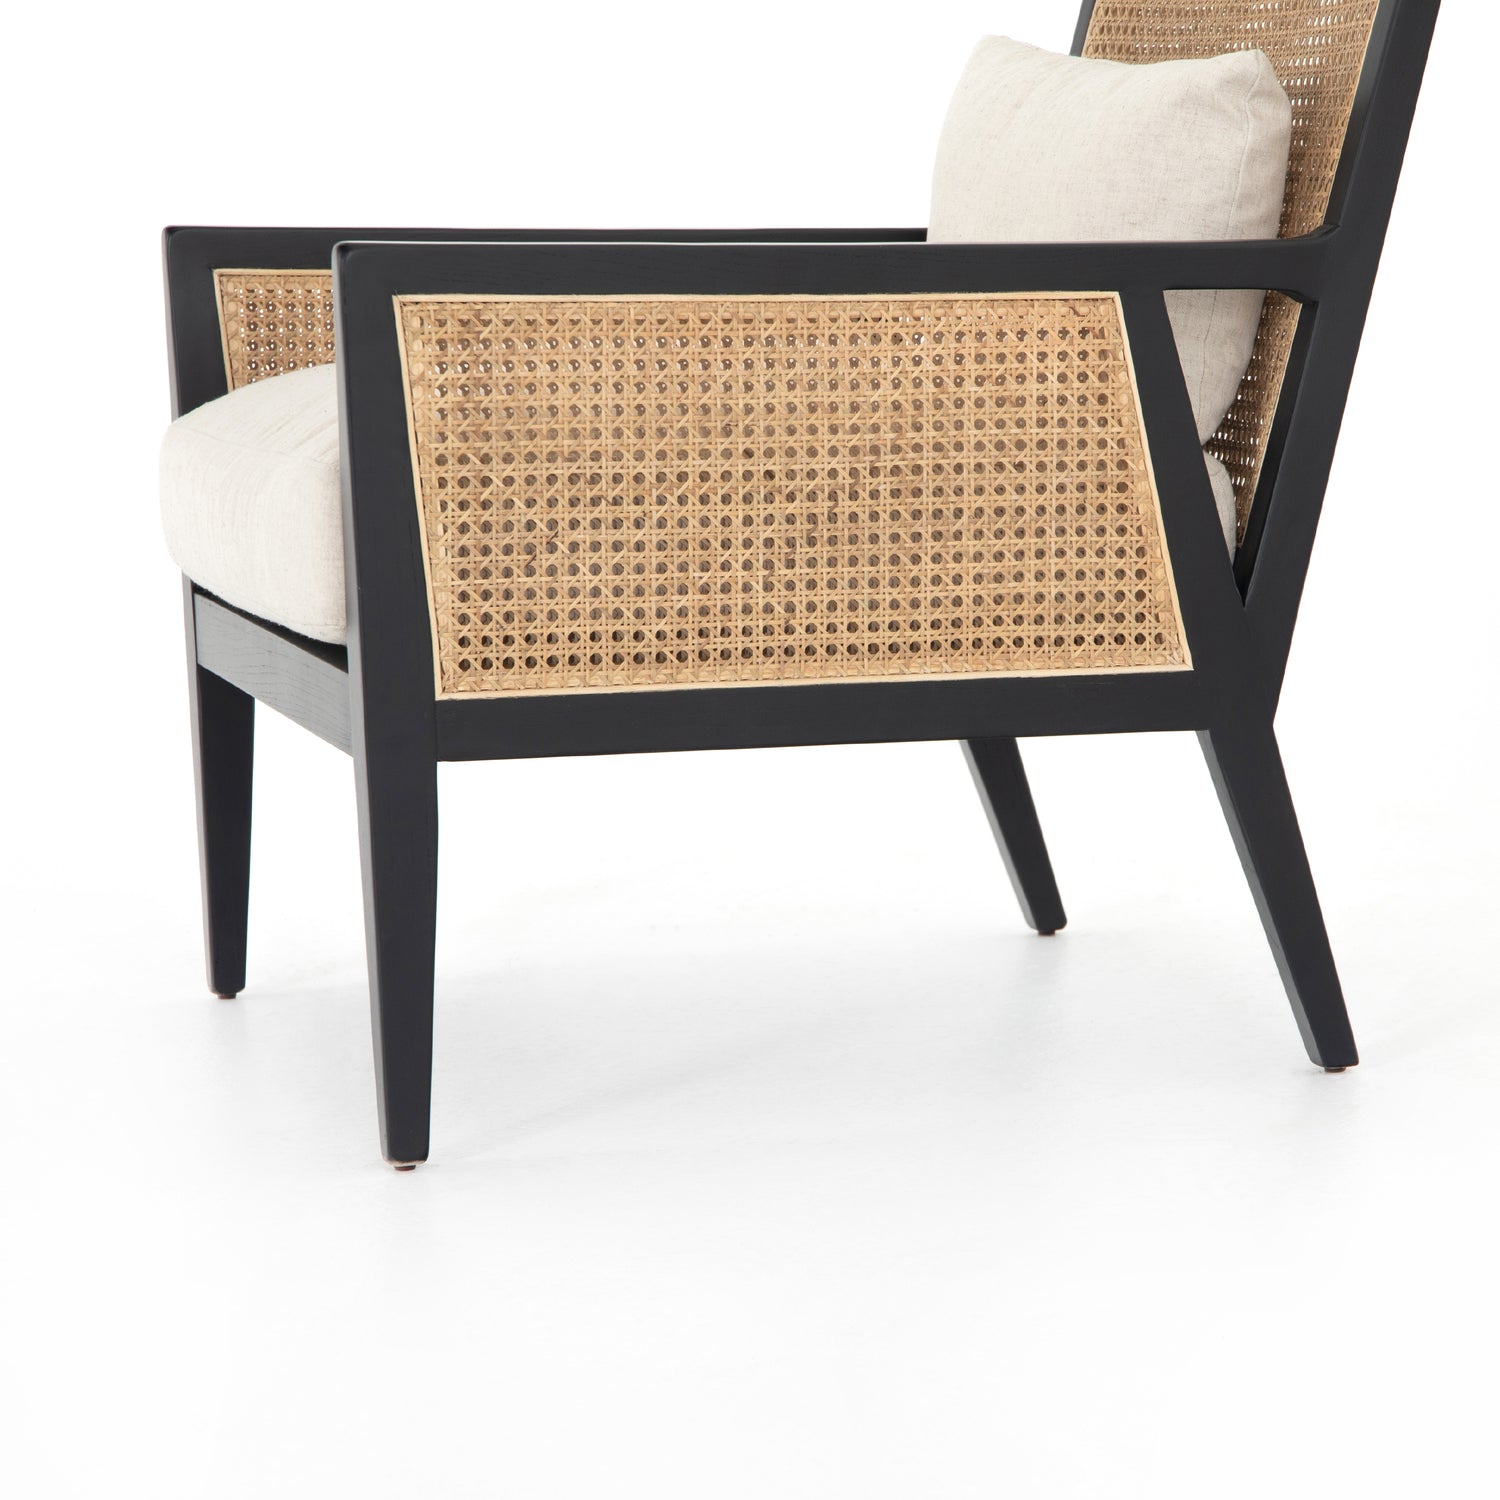 Savile Flax Fabric & Natural Cane with Brushed Ebony Parawood | Antonia Cane Chair | Valley Ridge Furniture